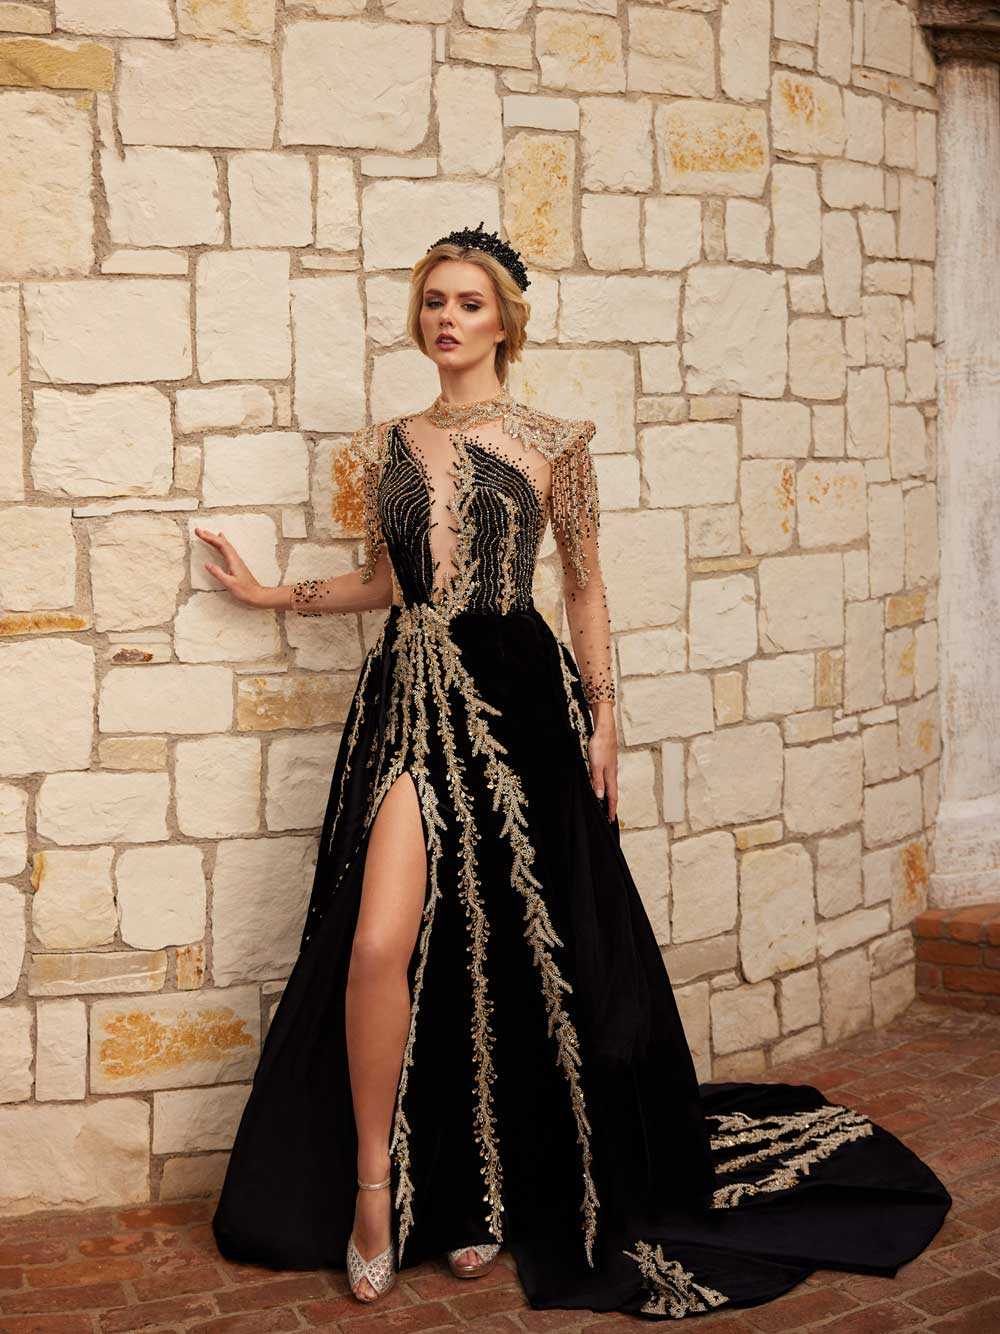 buy Chic Black Gold Lace Embellished Long Velvet İllusion Neck Formal Evening Party Prom Wedding Dress online party stores